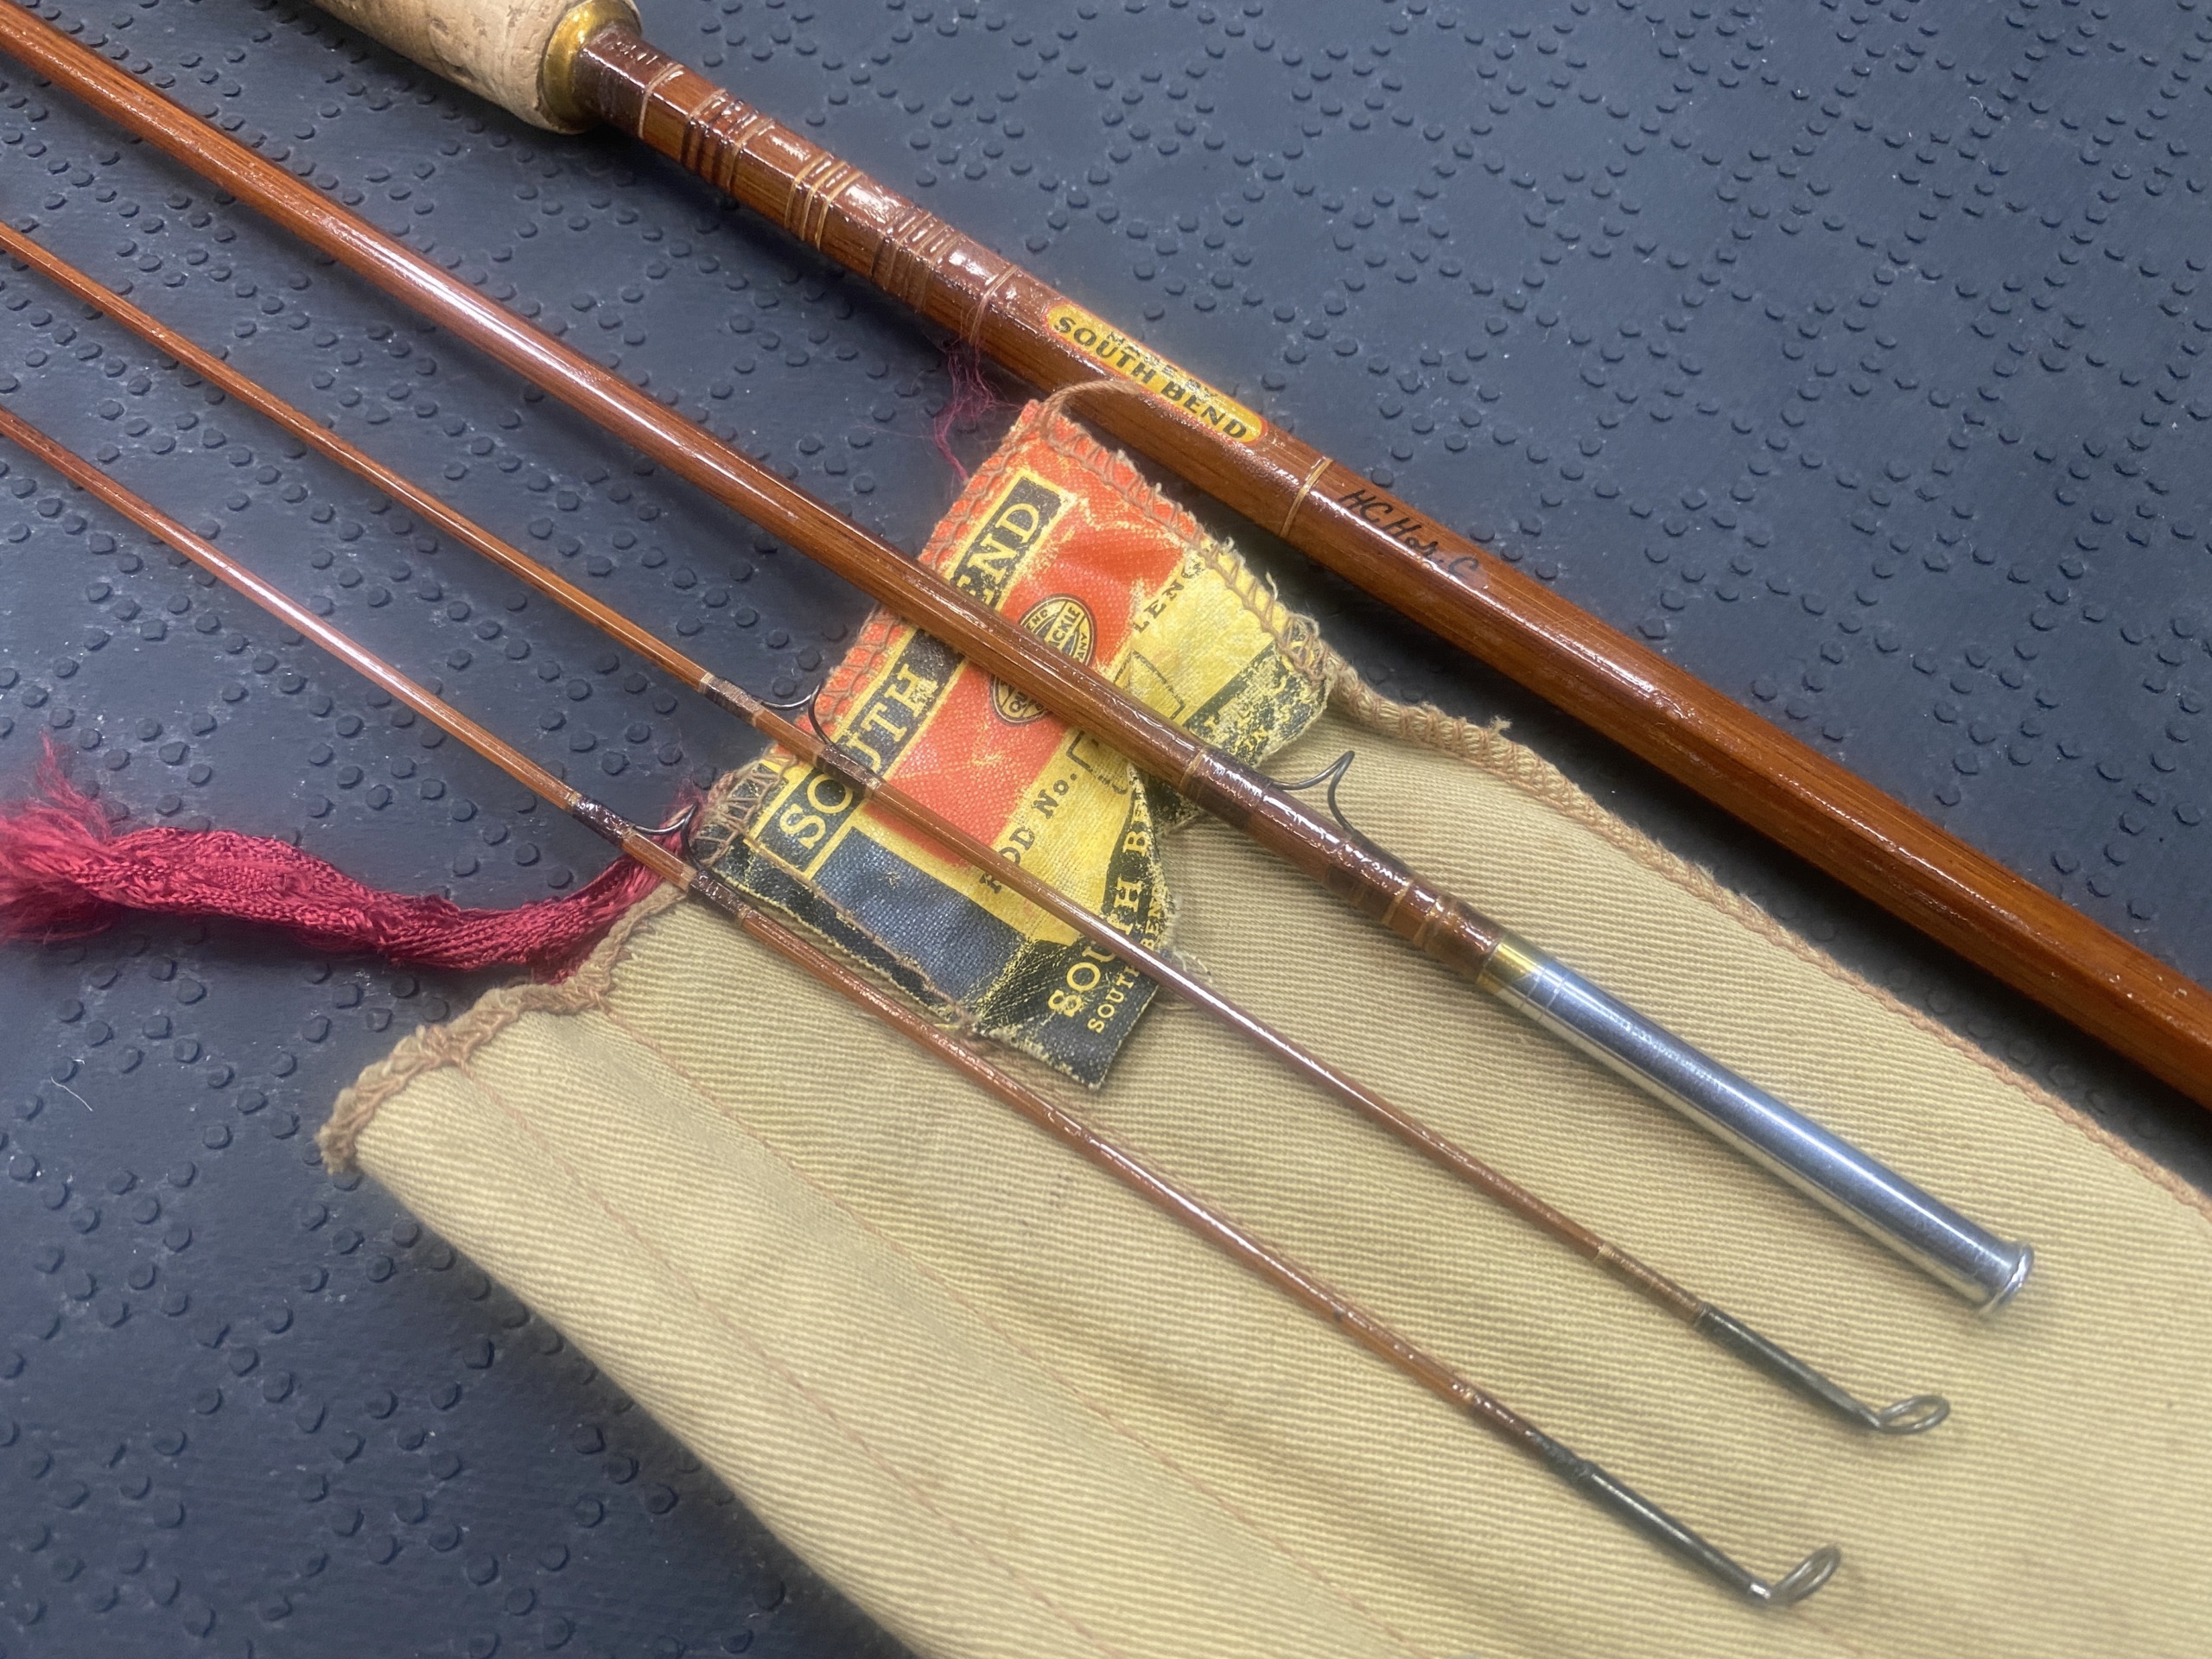 https://thefirstcast.ca/wp-content/uploads/2022/02/Vintage-South-Bend-Model-24-9-3pc-HCH-6-7Wt-2Tip-Bamboo-Fly-Rod-CW-Original-Cloth-Bag-C-scaled.jpg